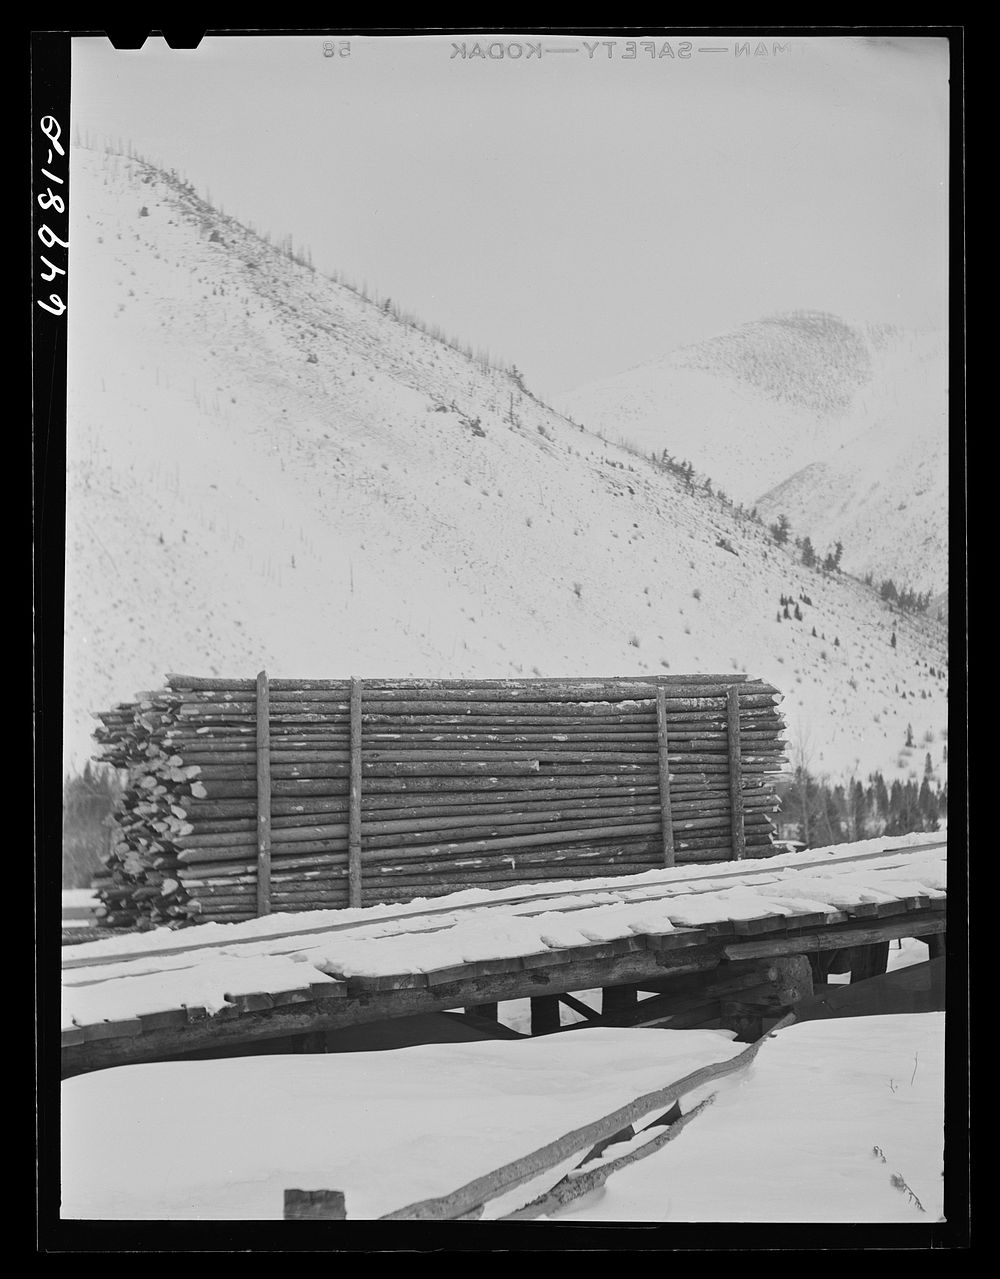 [Untitled photo, possibly related to: Granite County, Montana. Timber]. Sourced from the Library of Congress.